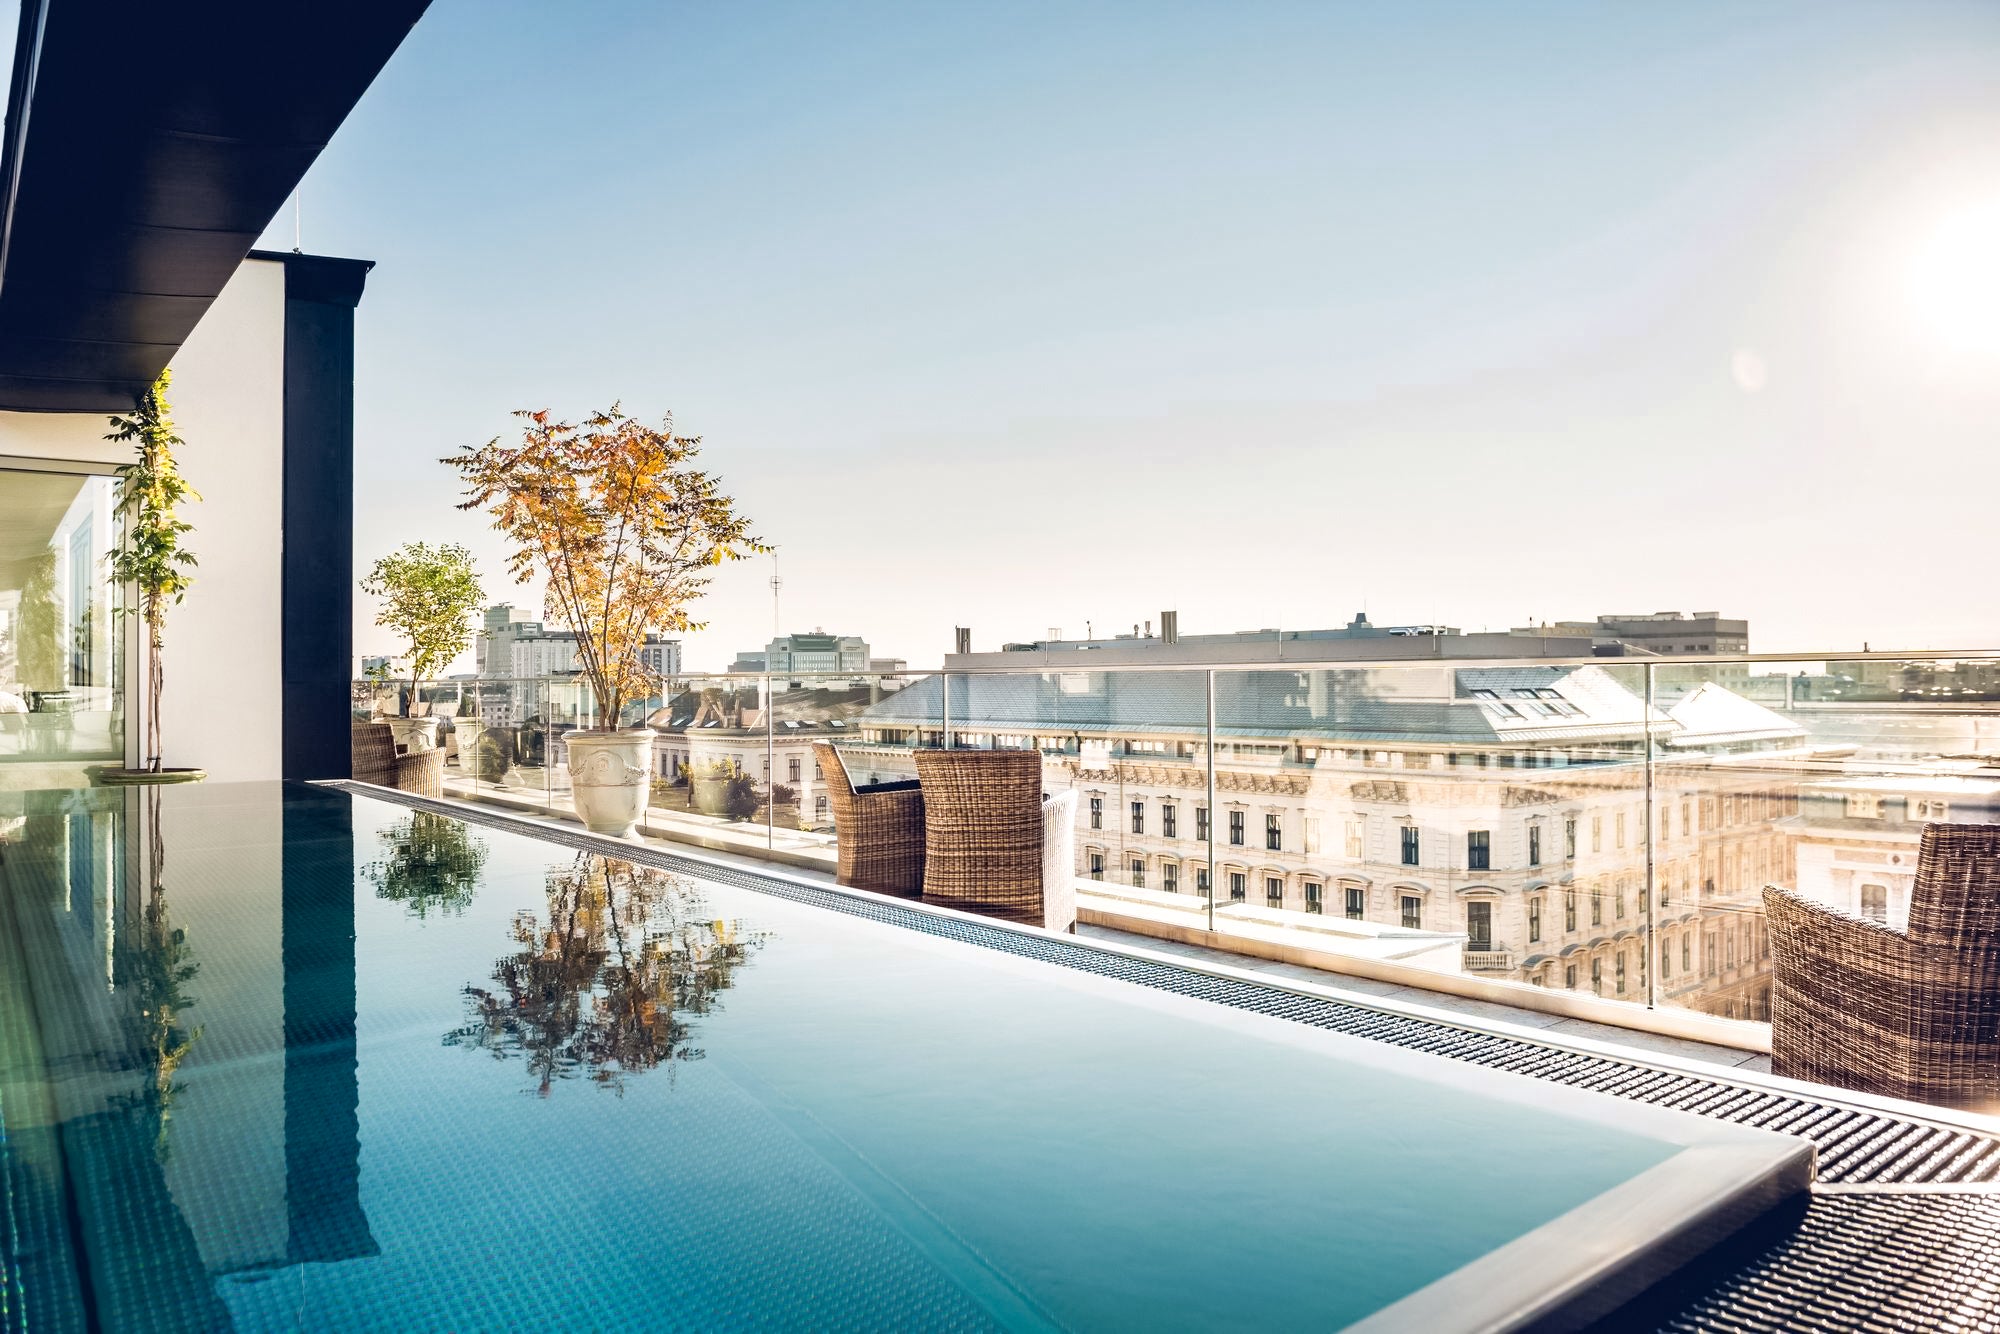 Experience Vienna in style with a stay at the Grand Ferdinand hotel